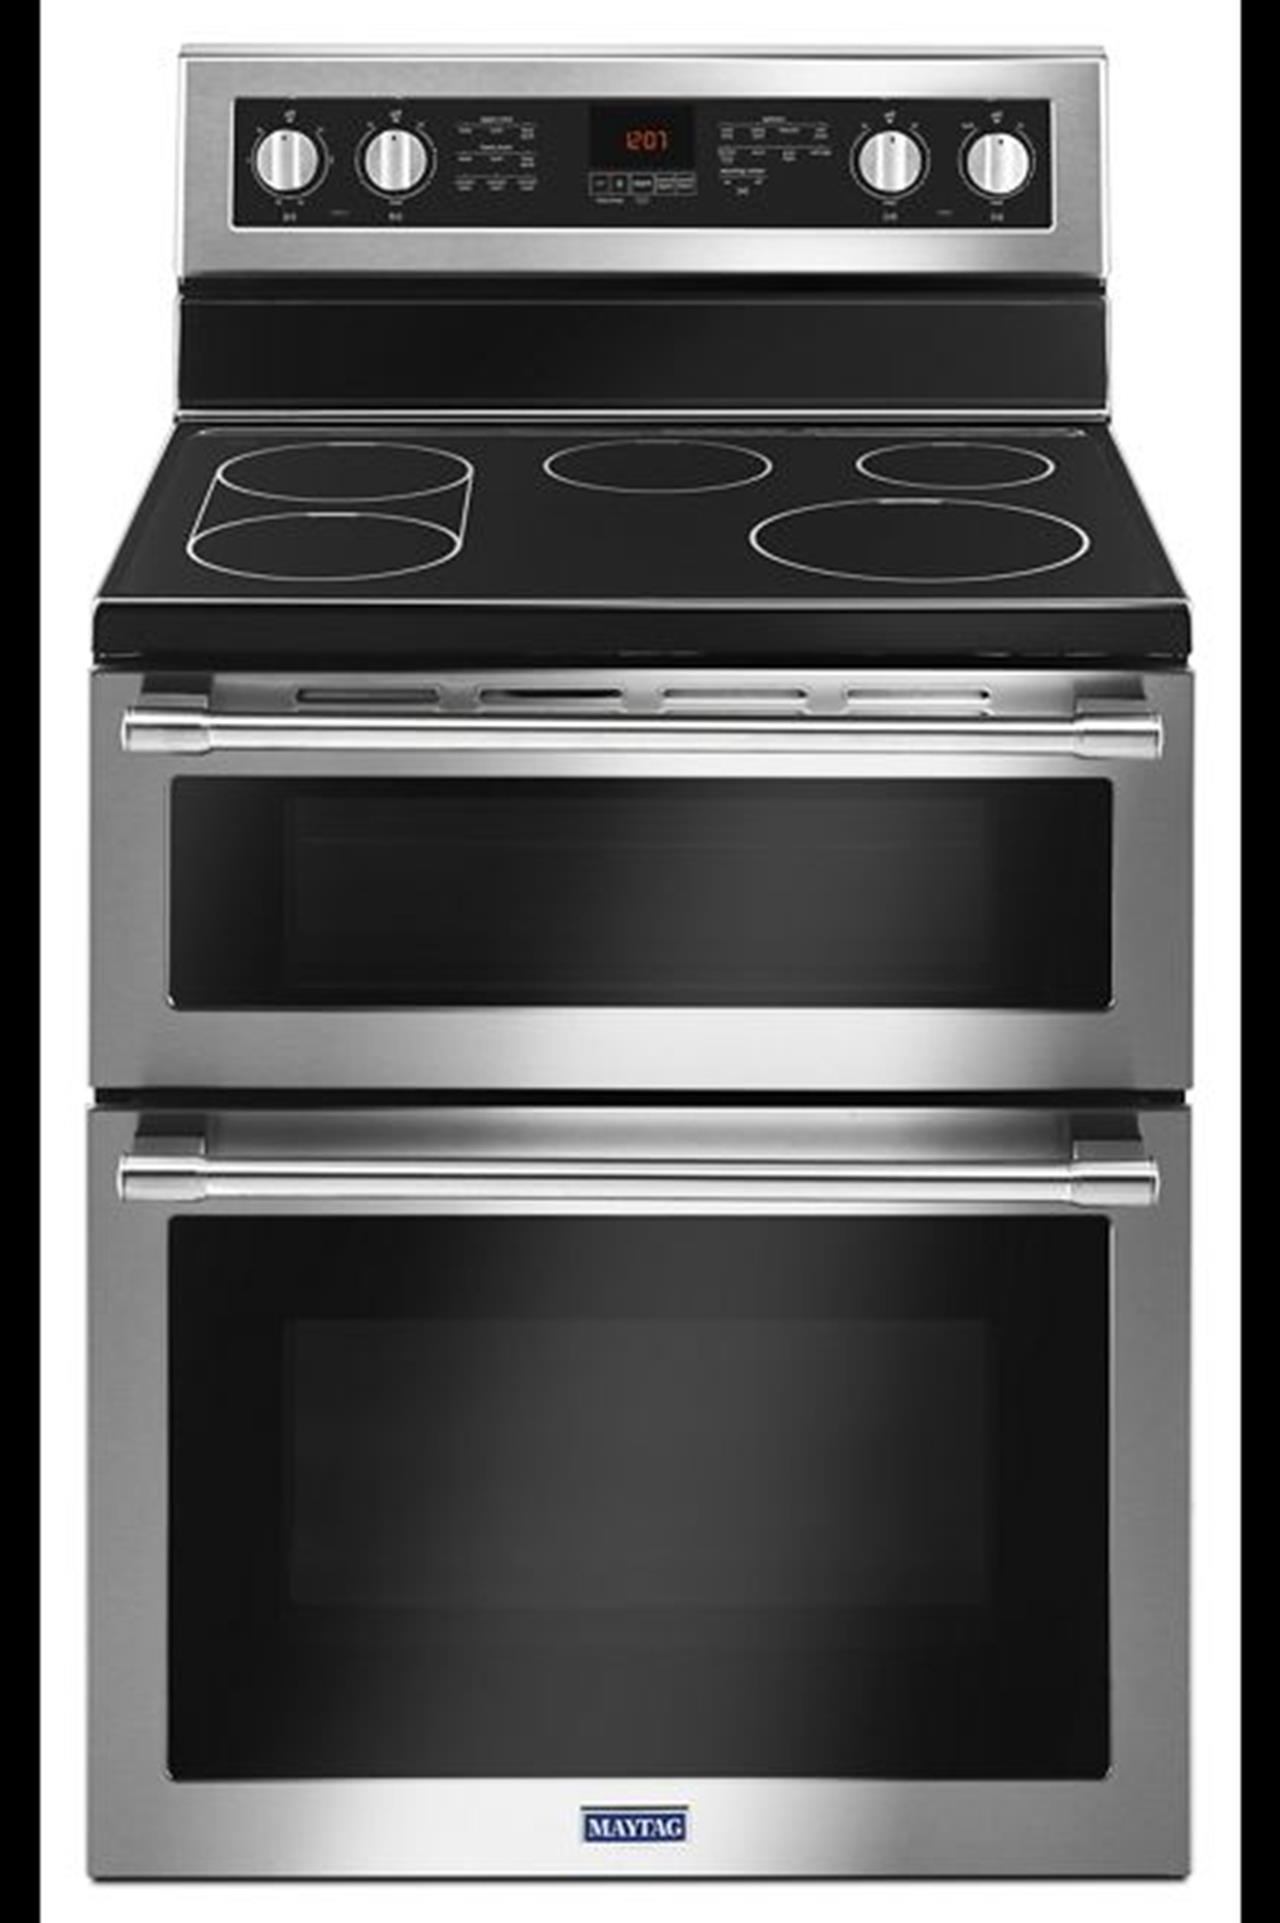 Maytag MET8800FZ electric glass top range with double oven and convection lower oven. This unit has (..)